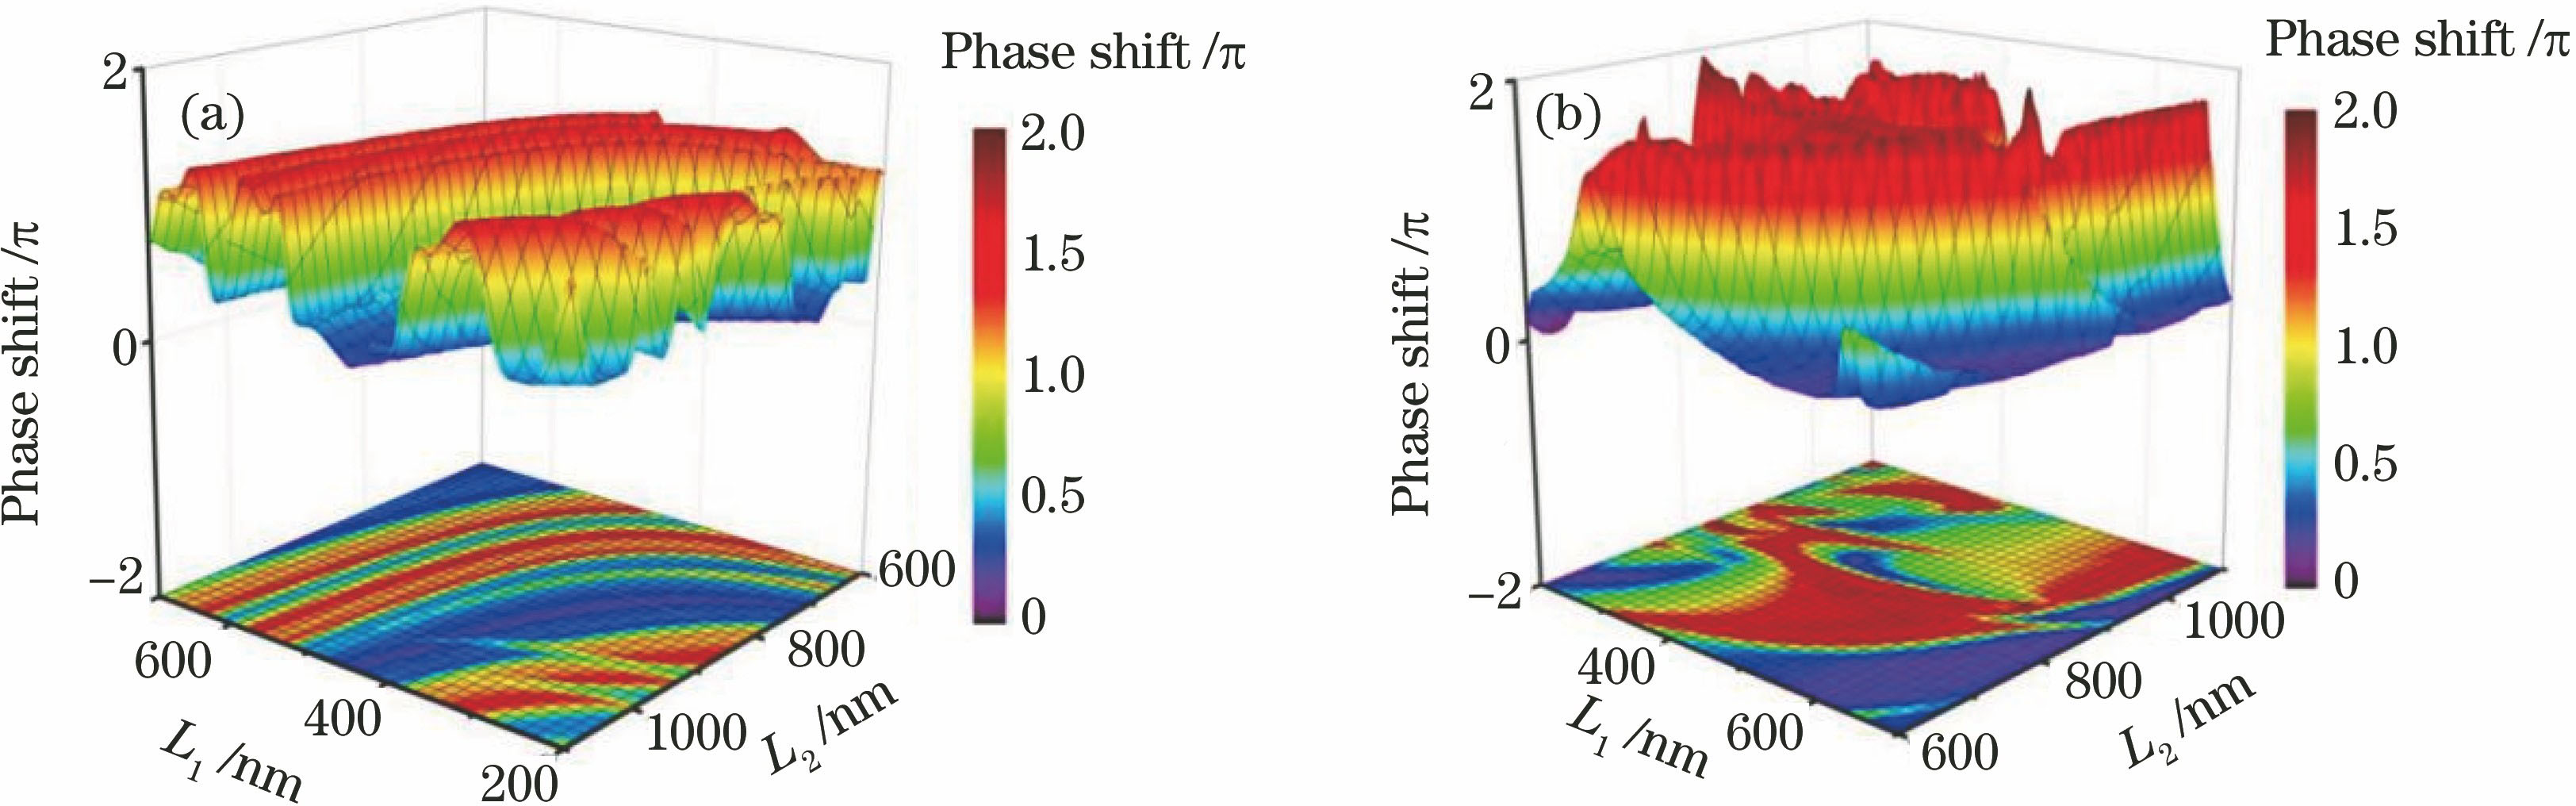 Phase modulation spectra of grooved grating microstructure with wavelengths of (a) 4.8 μm and (b) 10.6 μm